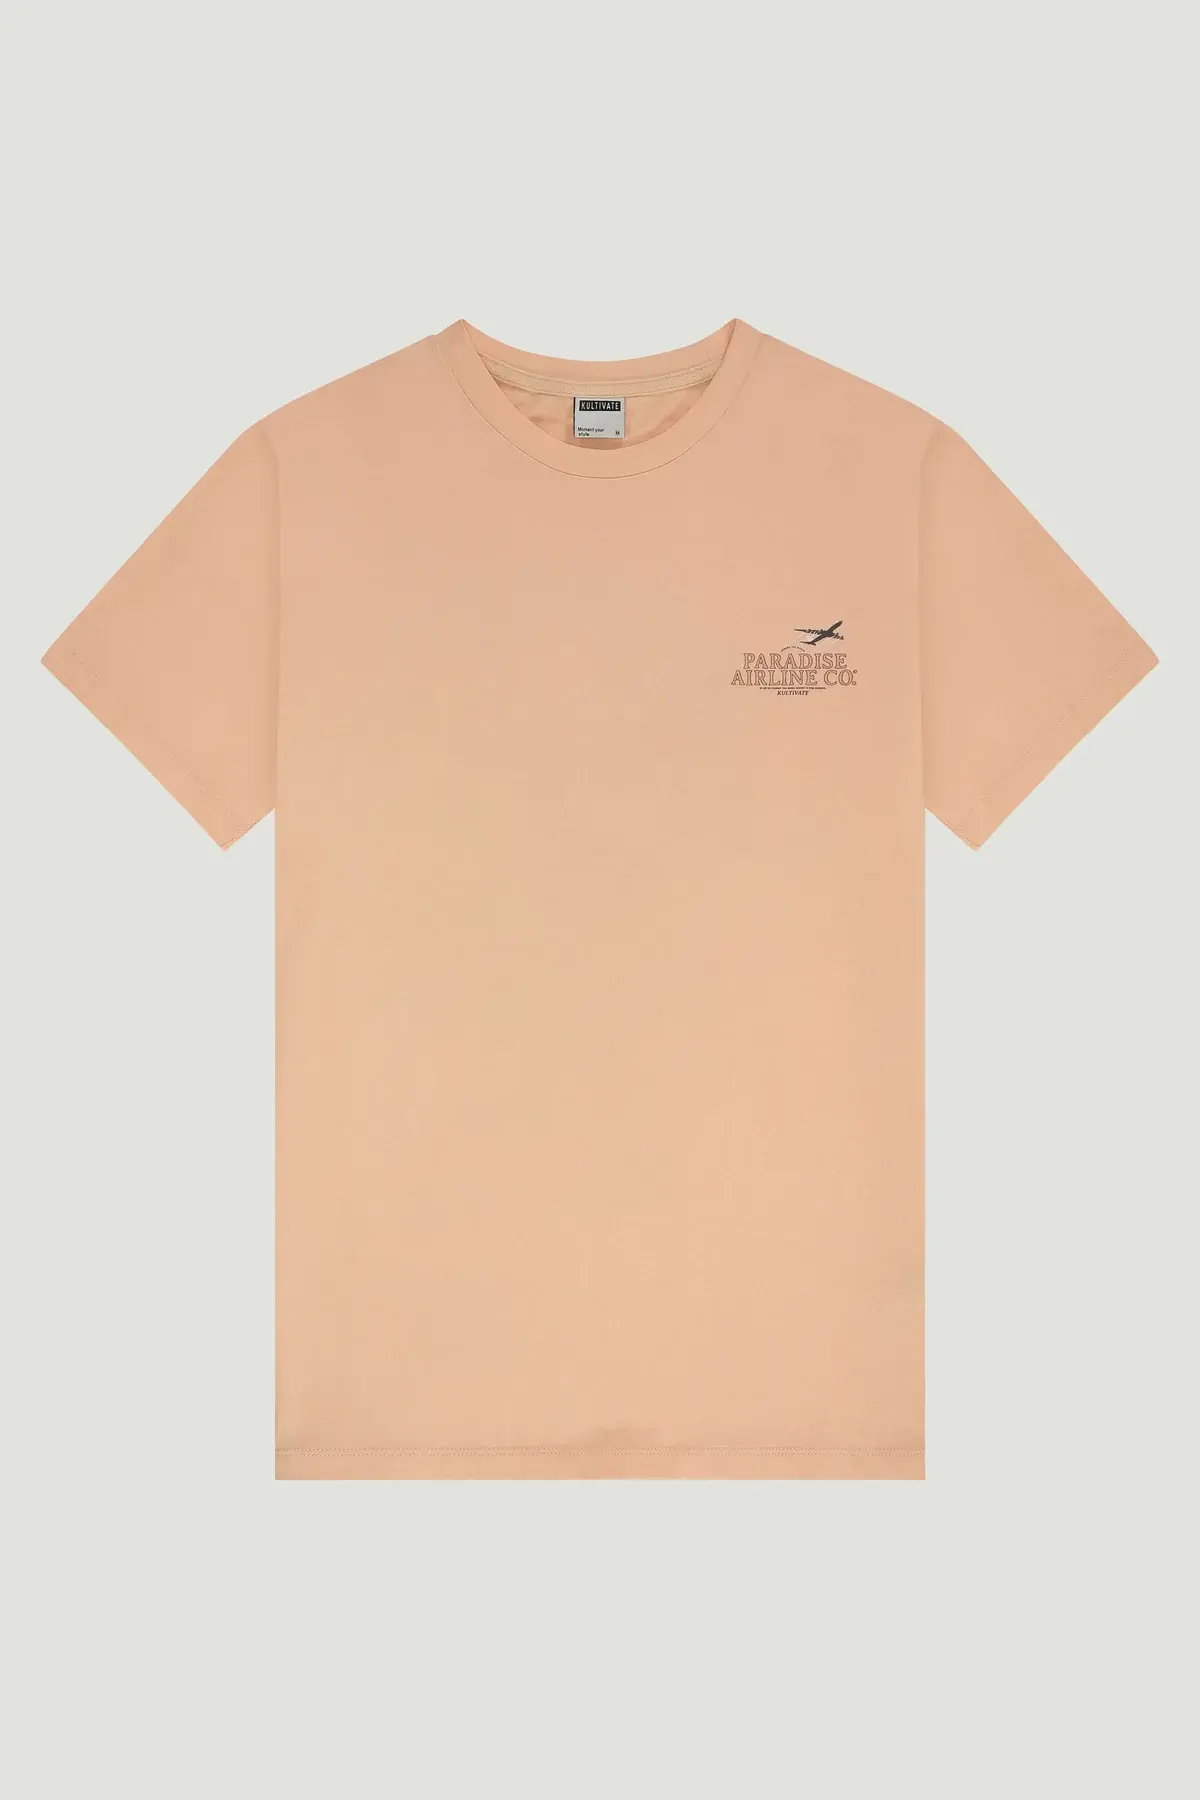 Kultivate Kultivate Airline Tee Peach Parfeit